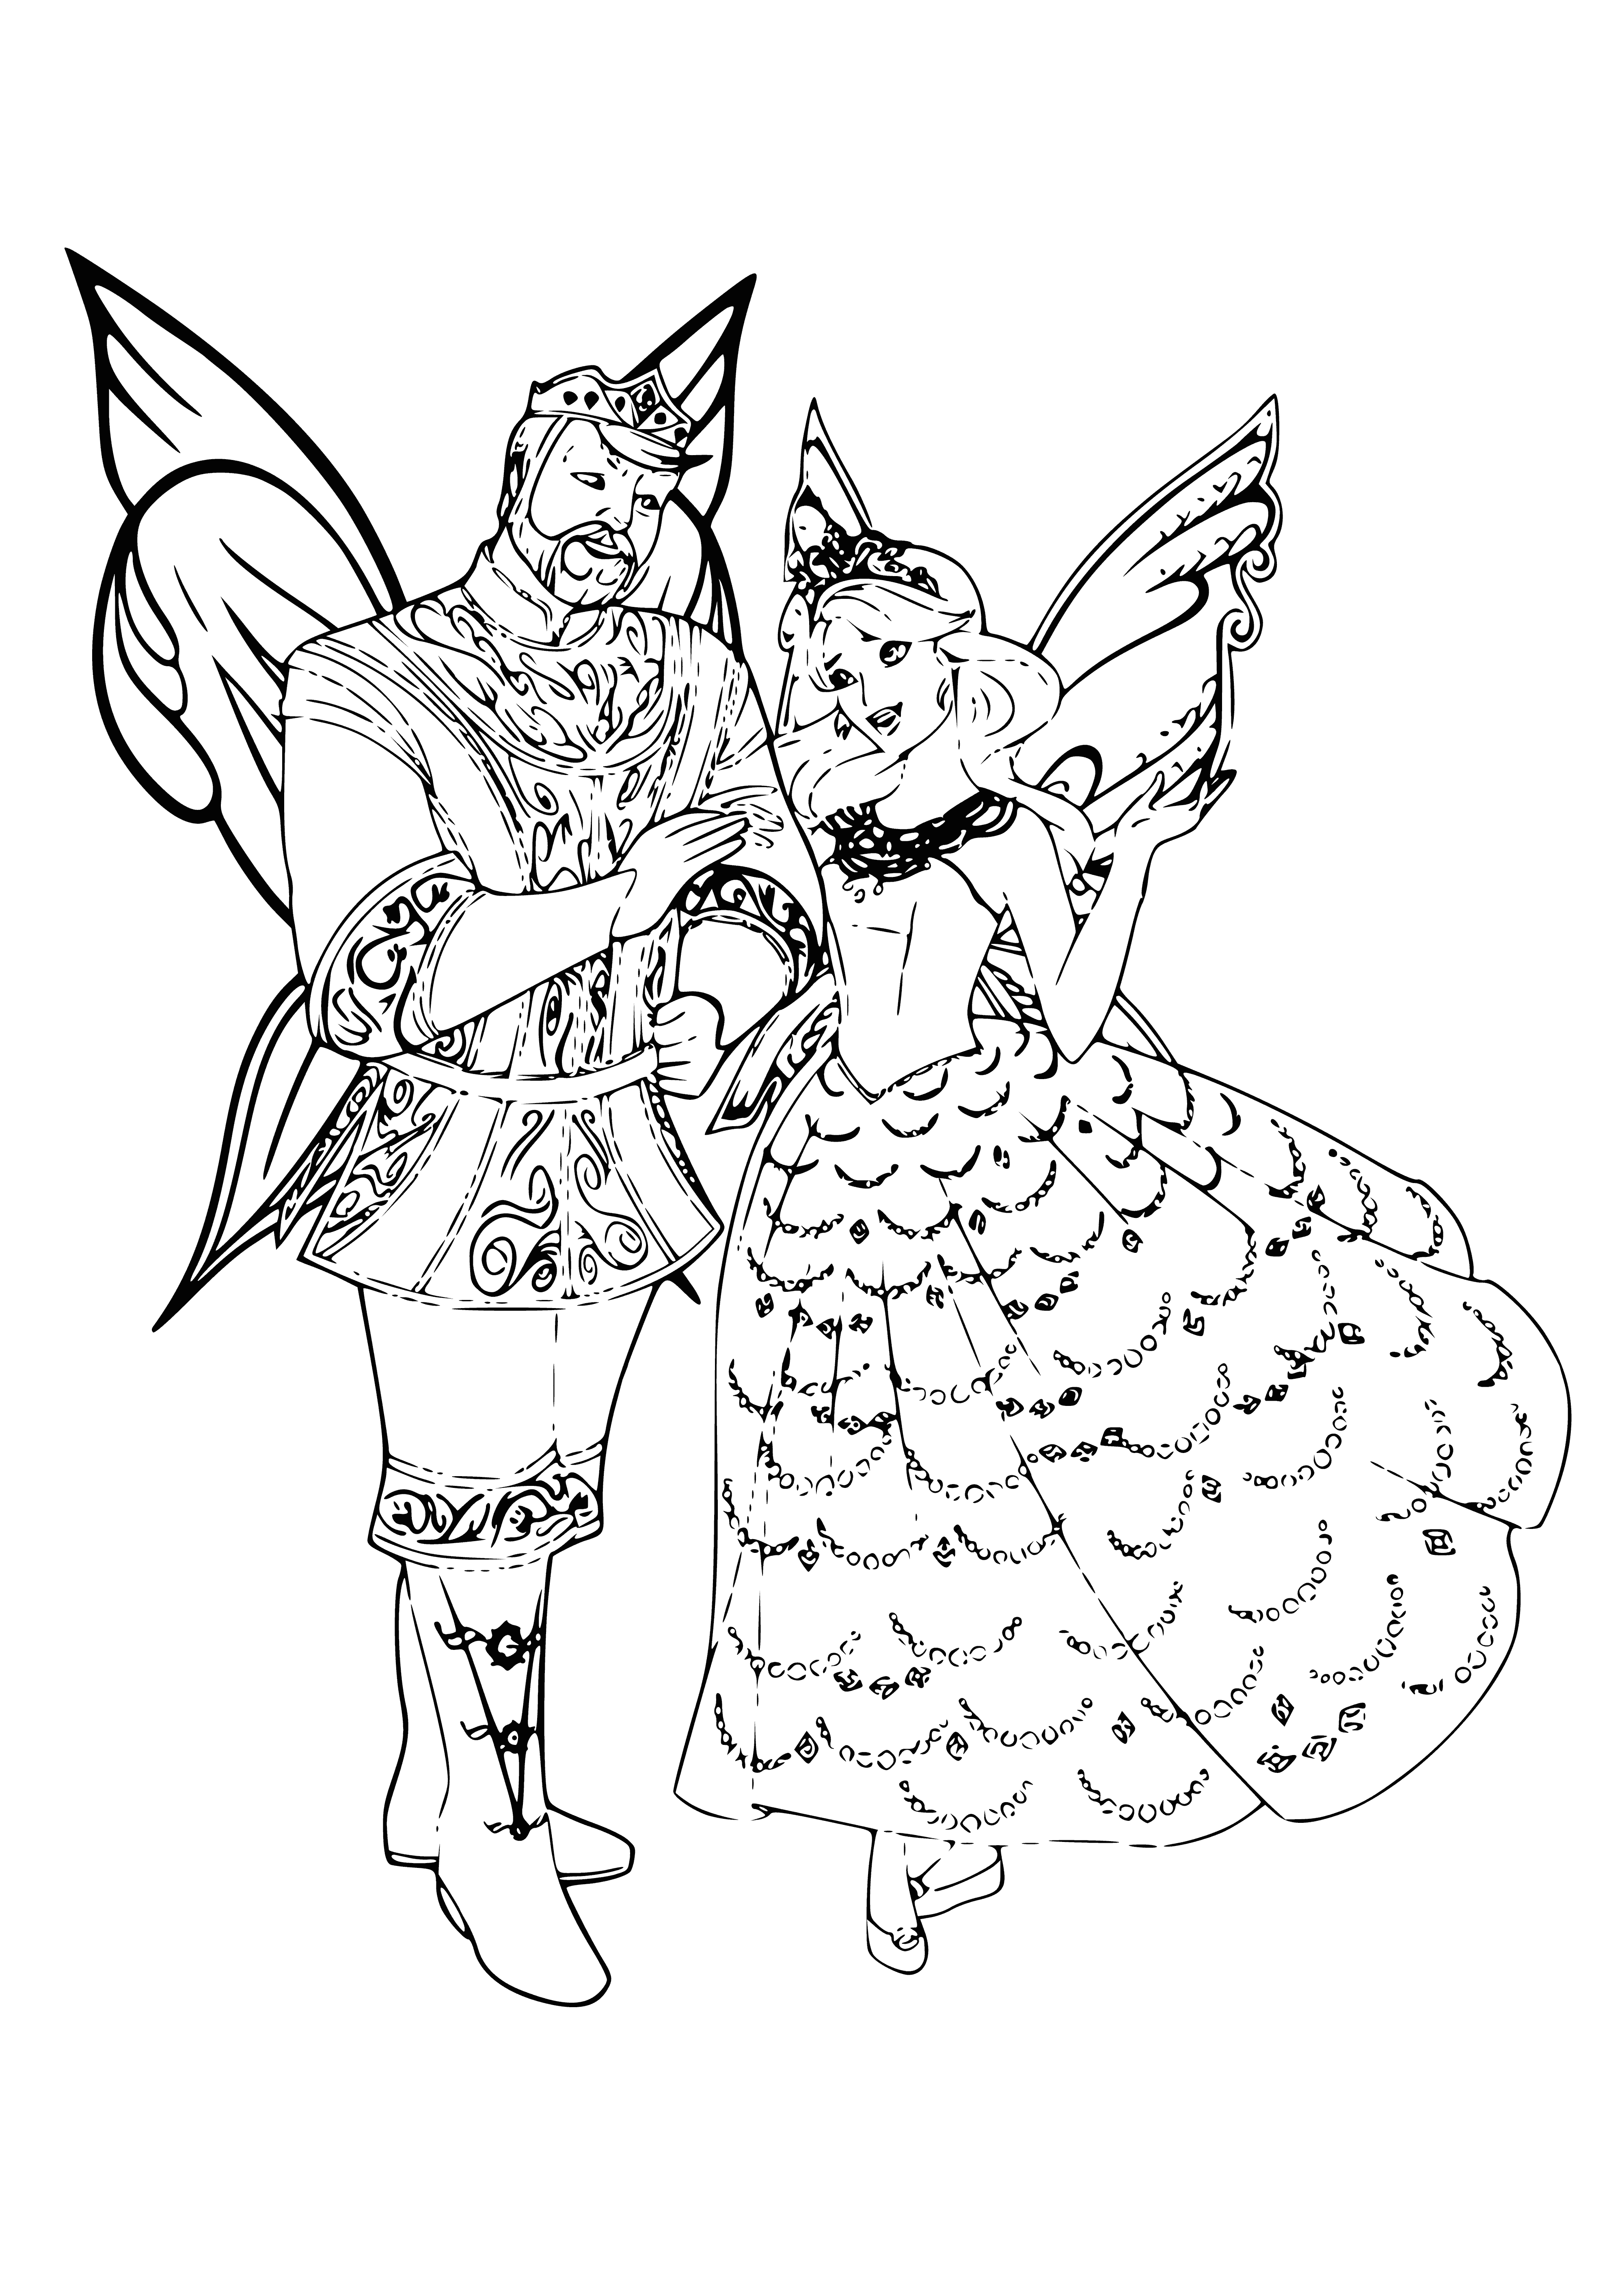 coloring page: King & princess of Catania stand on hill in middle of a field holding scepter & rose, wings spread wide.